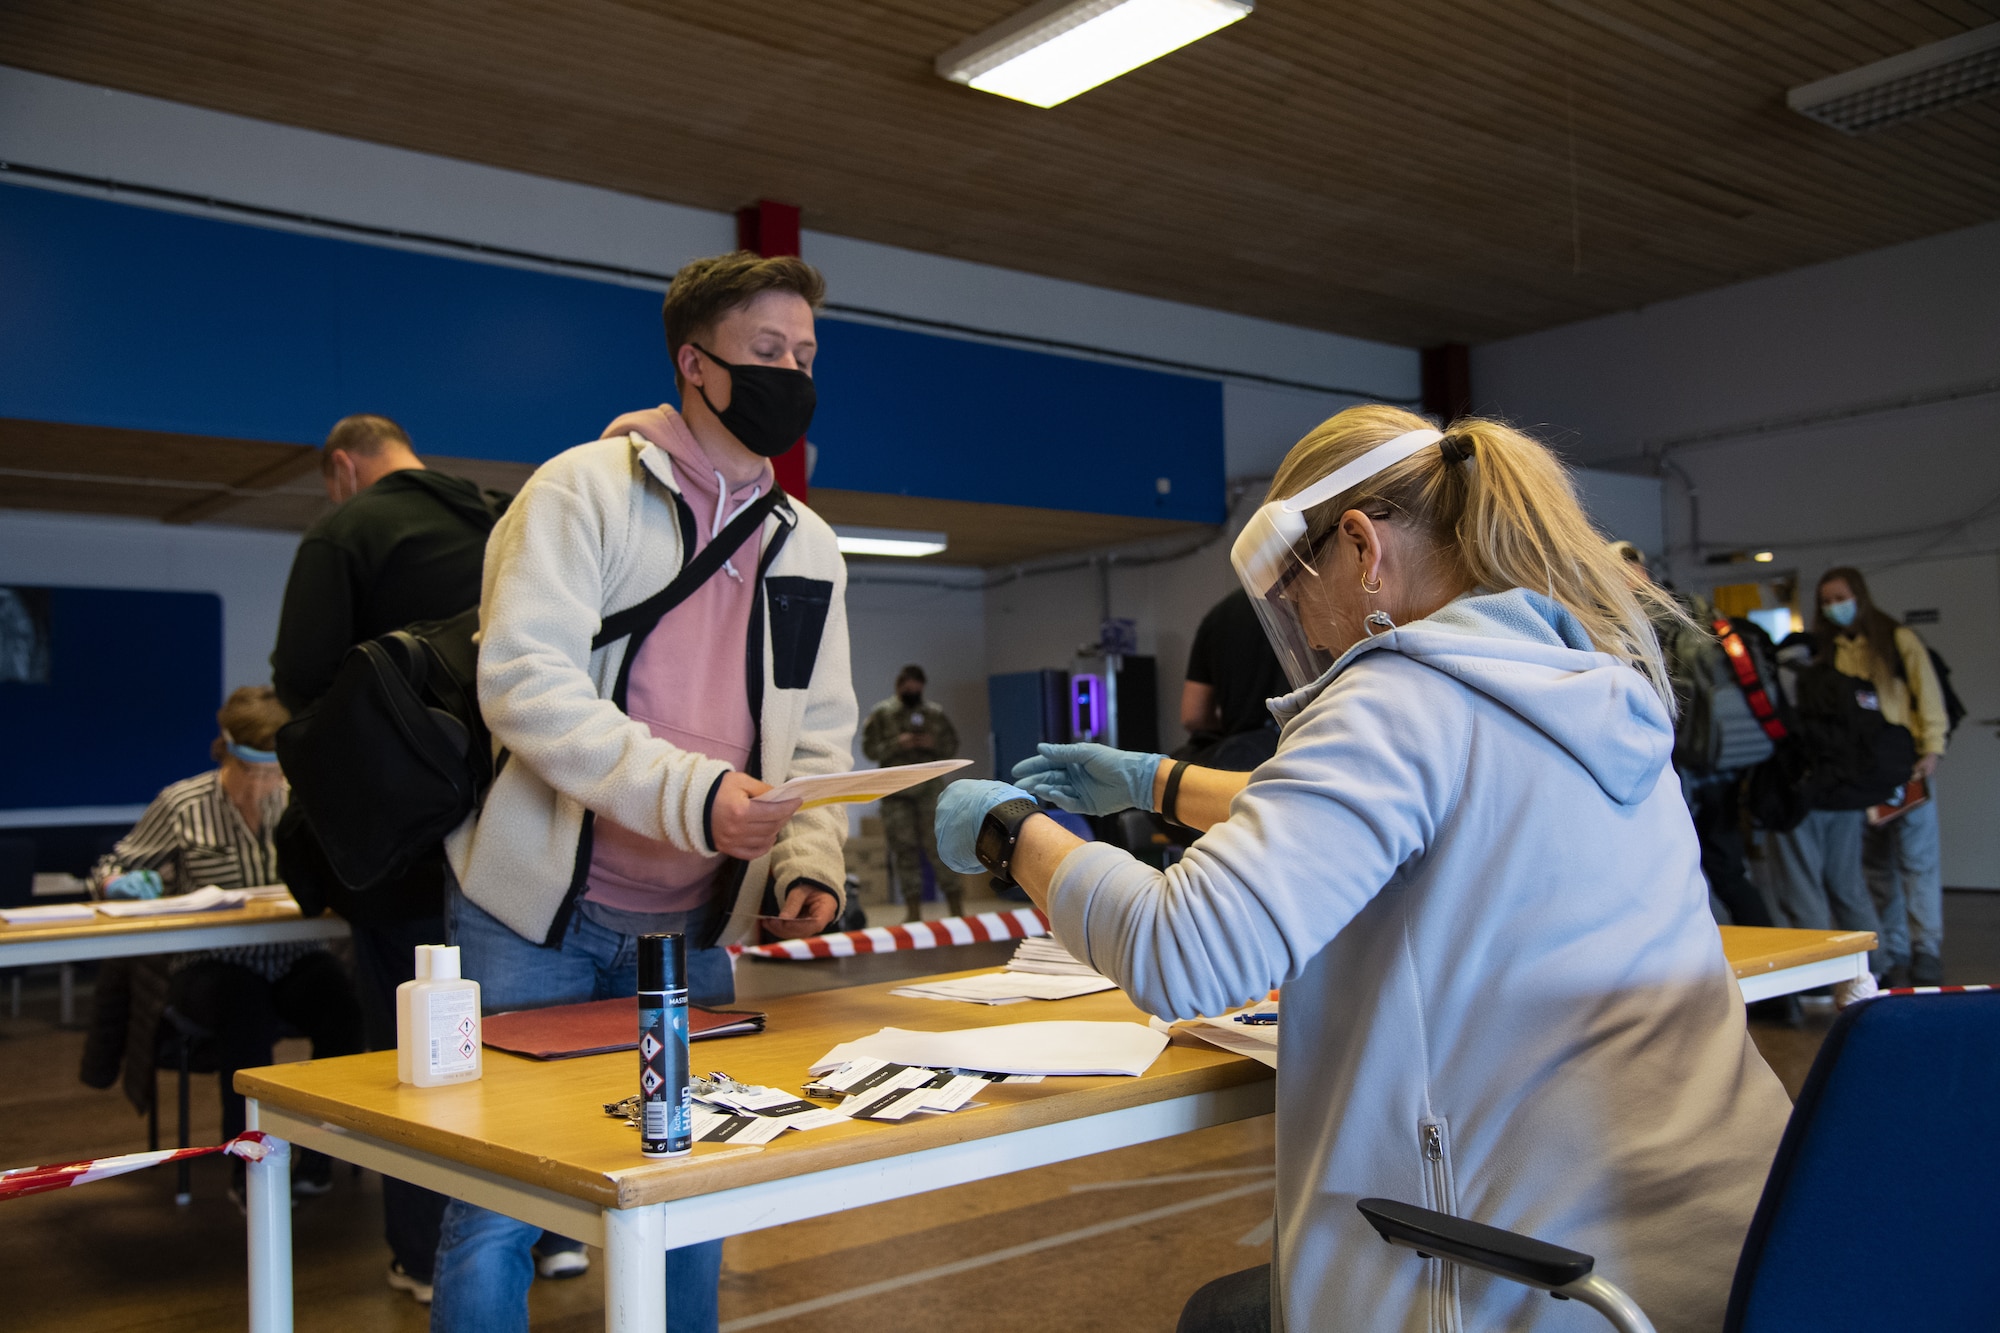 A U.S. Air Force Airman from Spangdahlem Air Base, Germany, left, presents paperwork to a Swedish border control employee at Kallax Air Base, Sweden, May 14, 2021. Airmen from the 52nd Fighter Wing at Spangdahlem Air Base took multiple precautions related to COVID-19 prior to entering Sweden to ensure a safe, healthy, and successful exercise for the entire duration of Arctic Challenge 2021. (U.S. Air Force photo by Senior Airman Ali Stewart)